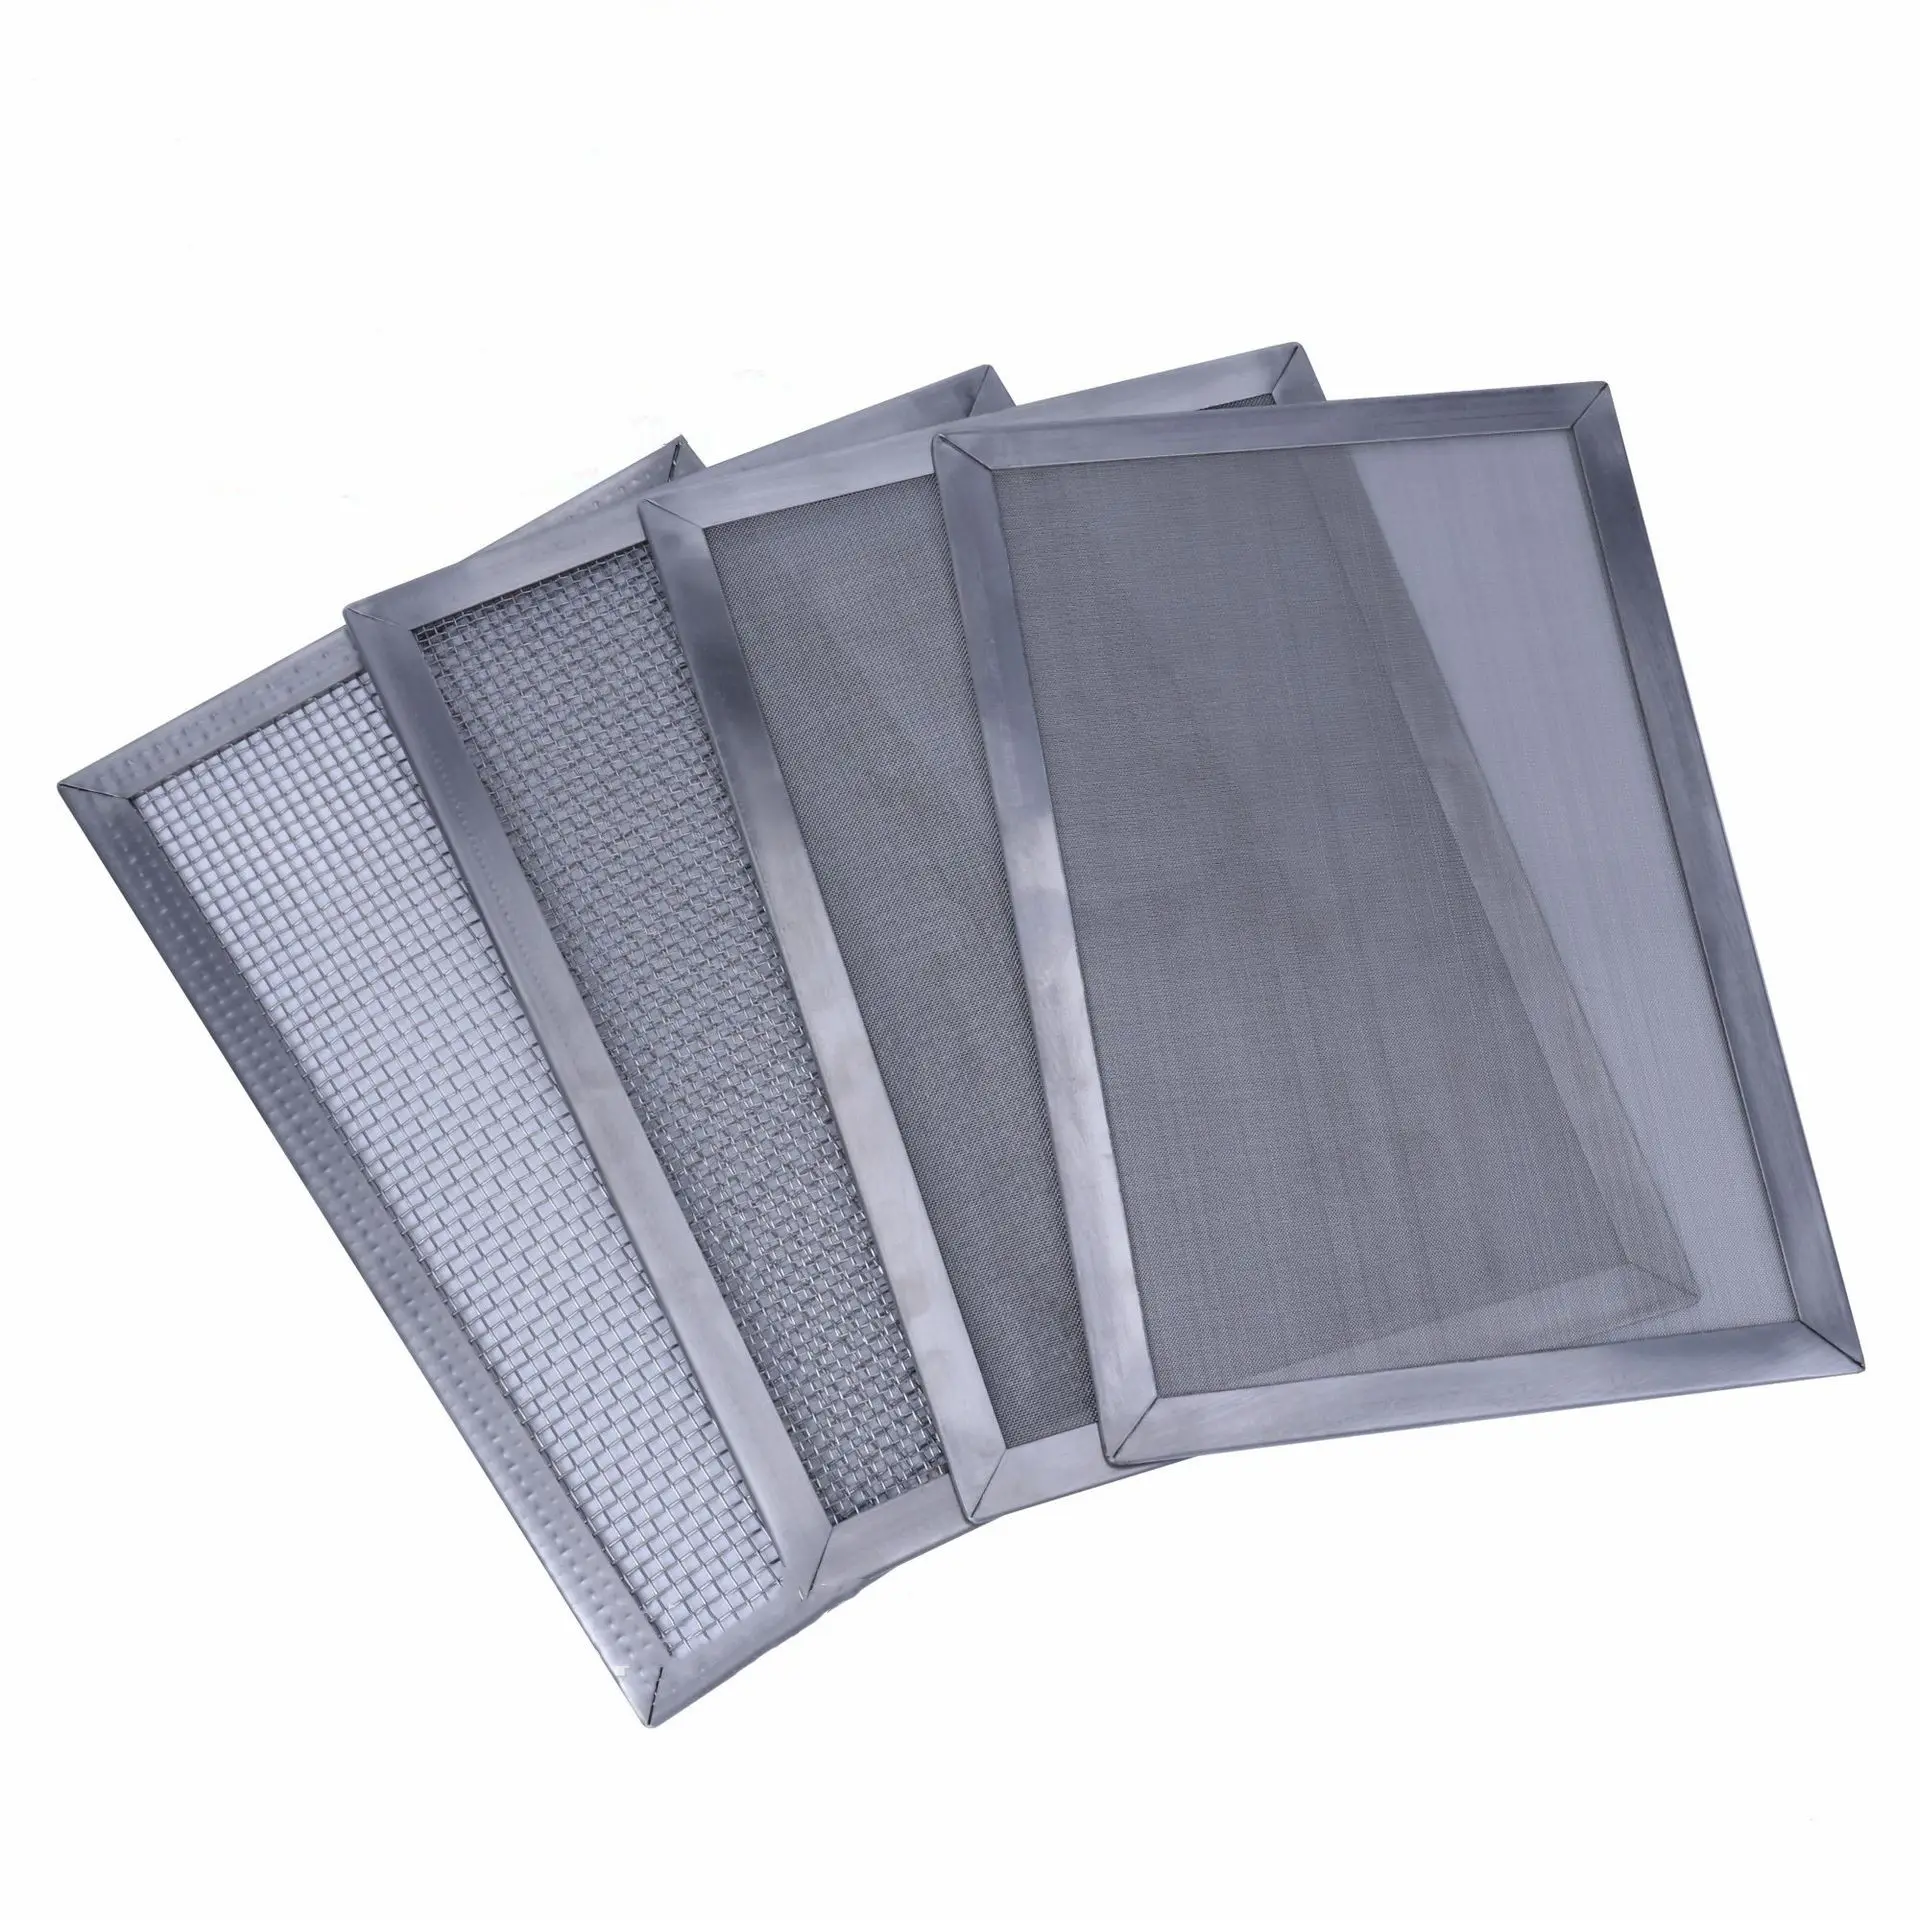 SS304 SS316 Stainless Steel Edge Filter Mesh Disc For Air Filtration